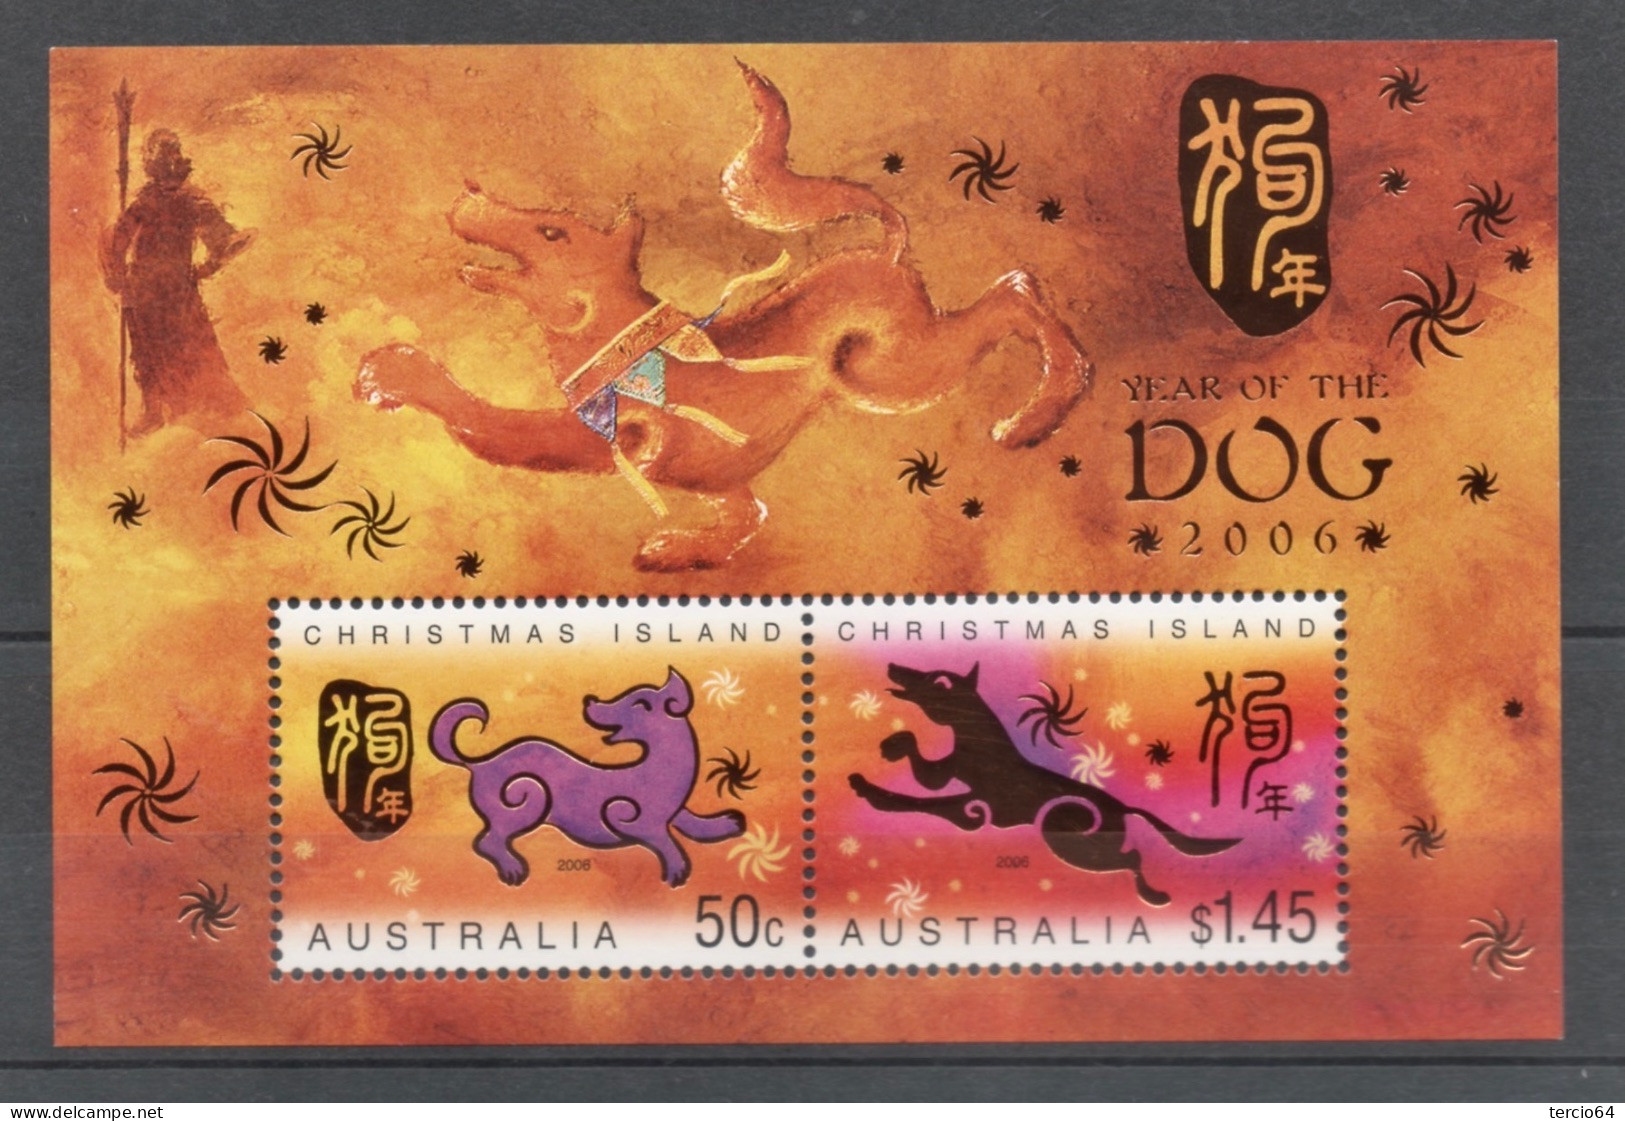 CHRISTMAS ISLAND * 2006 * Mini Bloc (2 Timbres), 2006 Année Du CHIEN - Year Of The Dog - Mi.No BL20 M/Sheet (2 Stamps) - Christmas Island